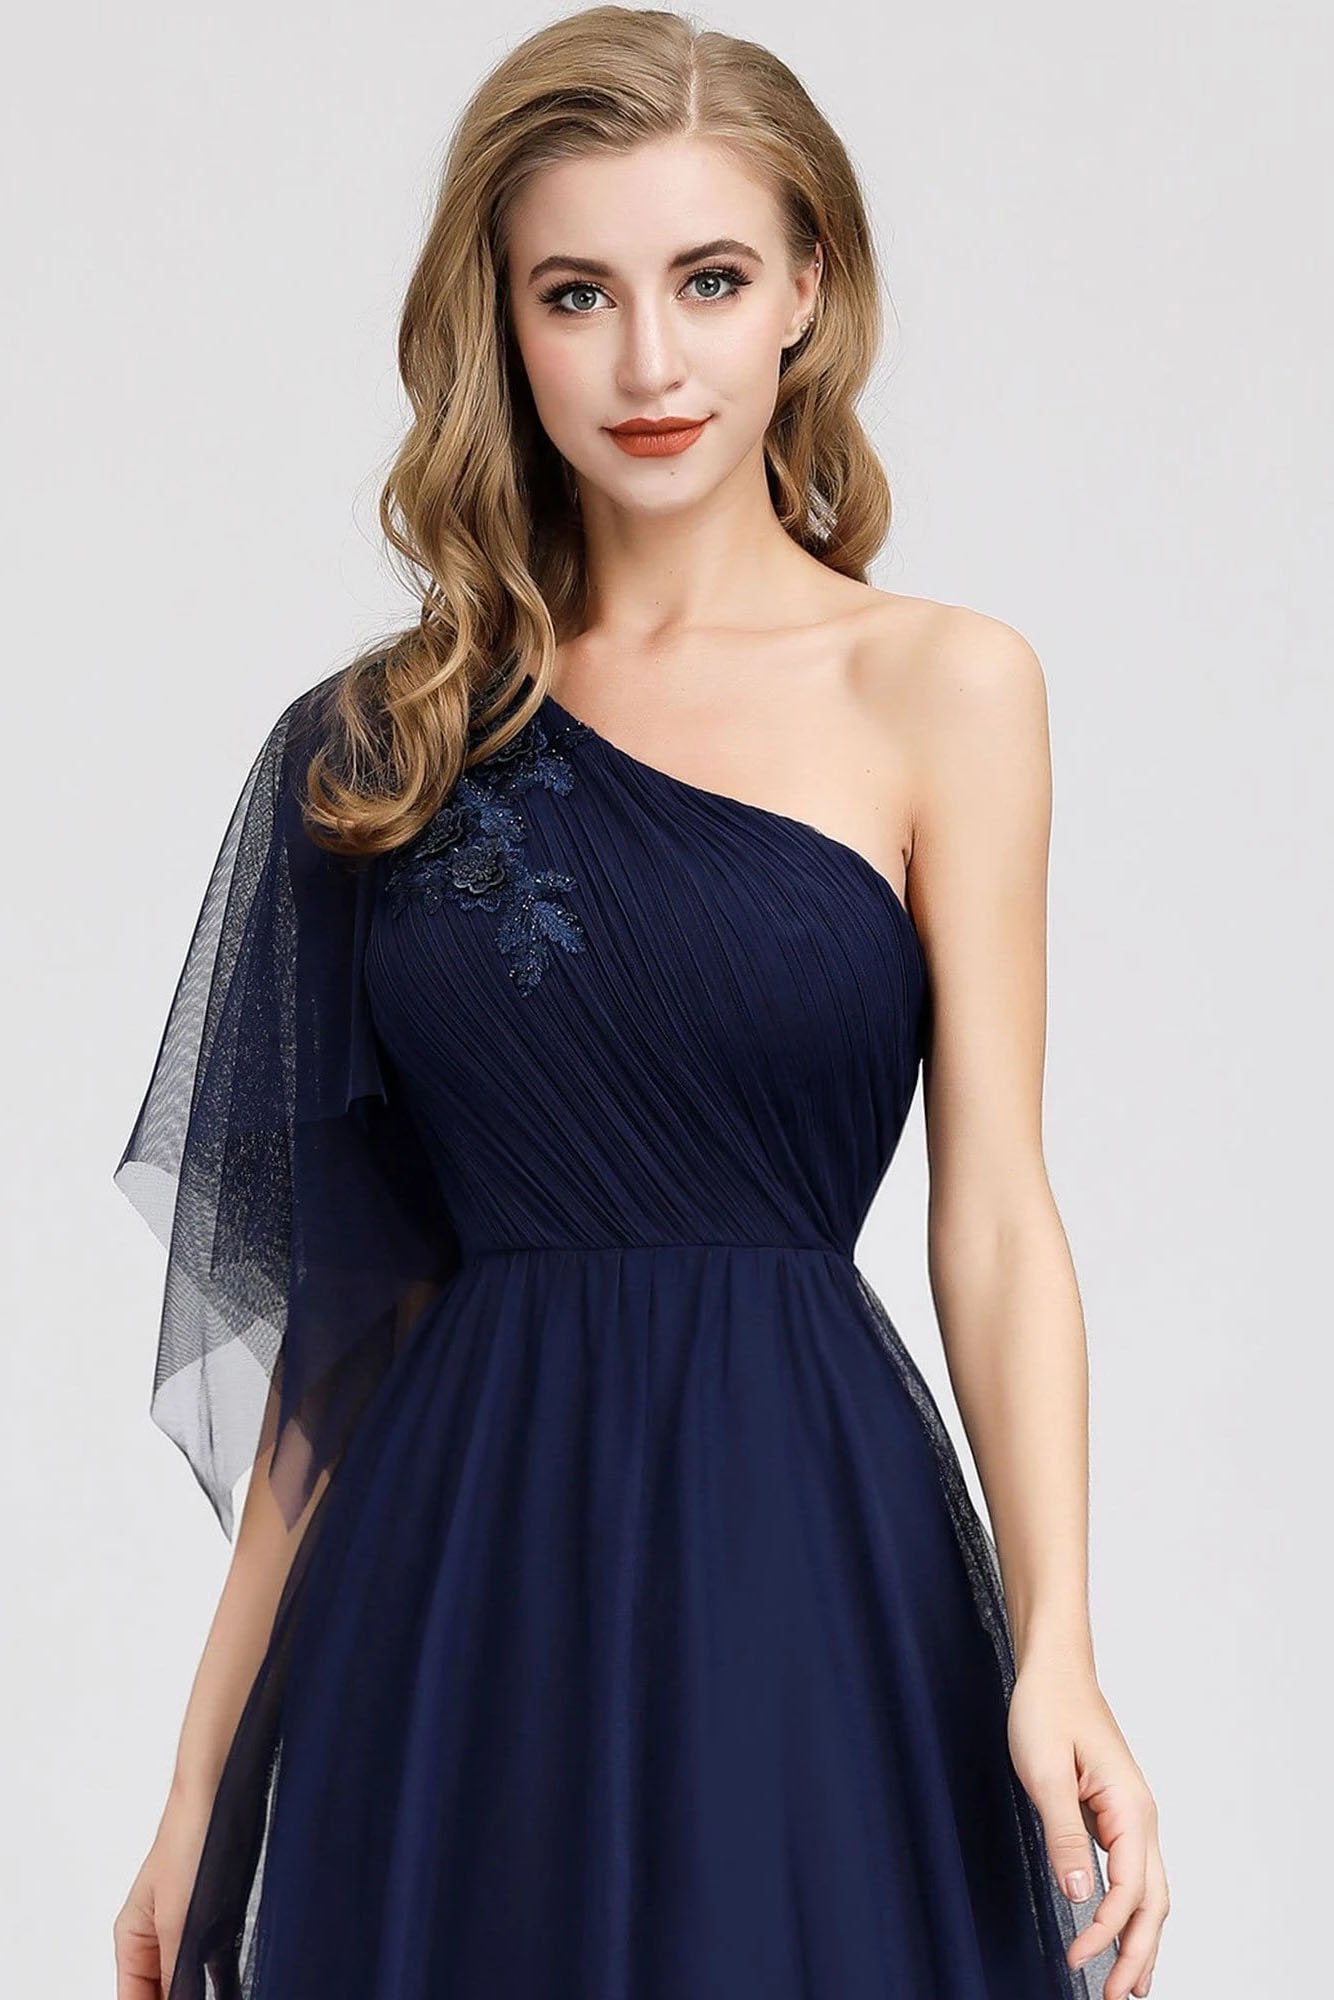 Simple A Line One Shoulder Navy Blue Tulle Prom Dresses Cheap Formal Dresses STC15382